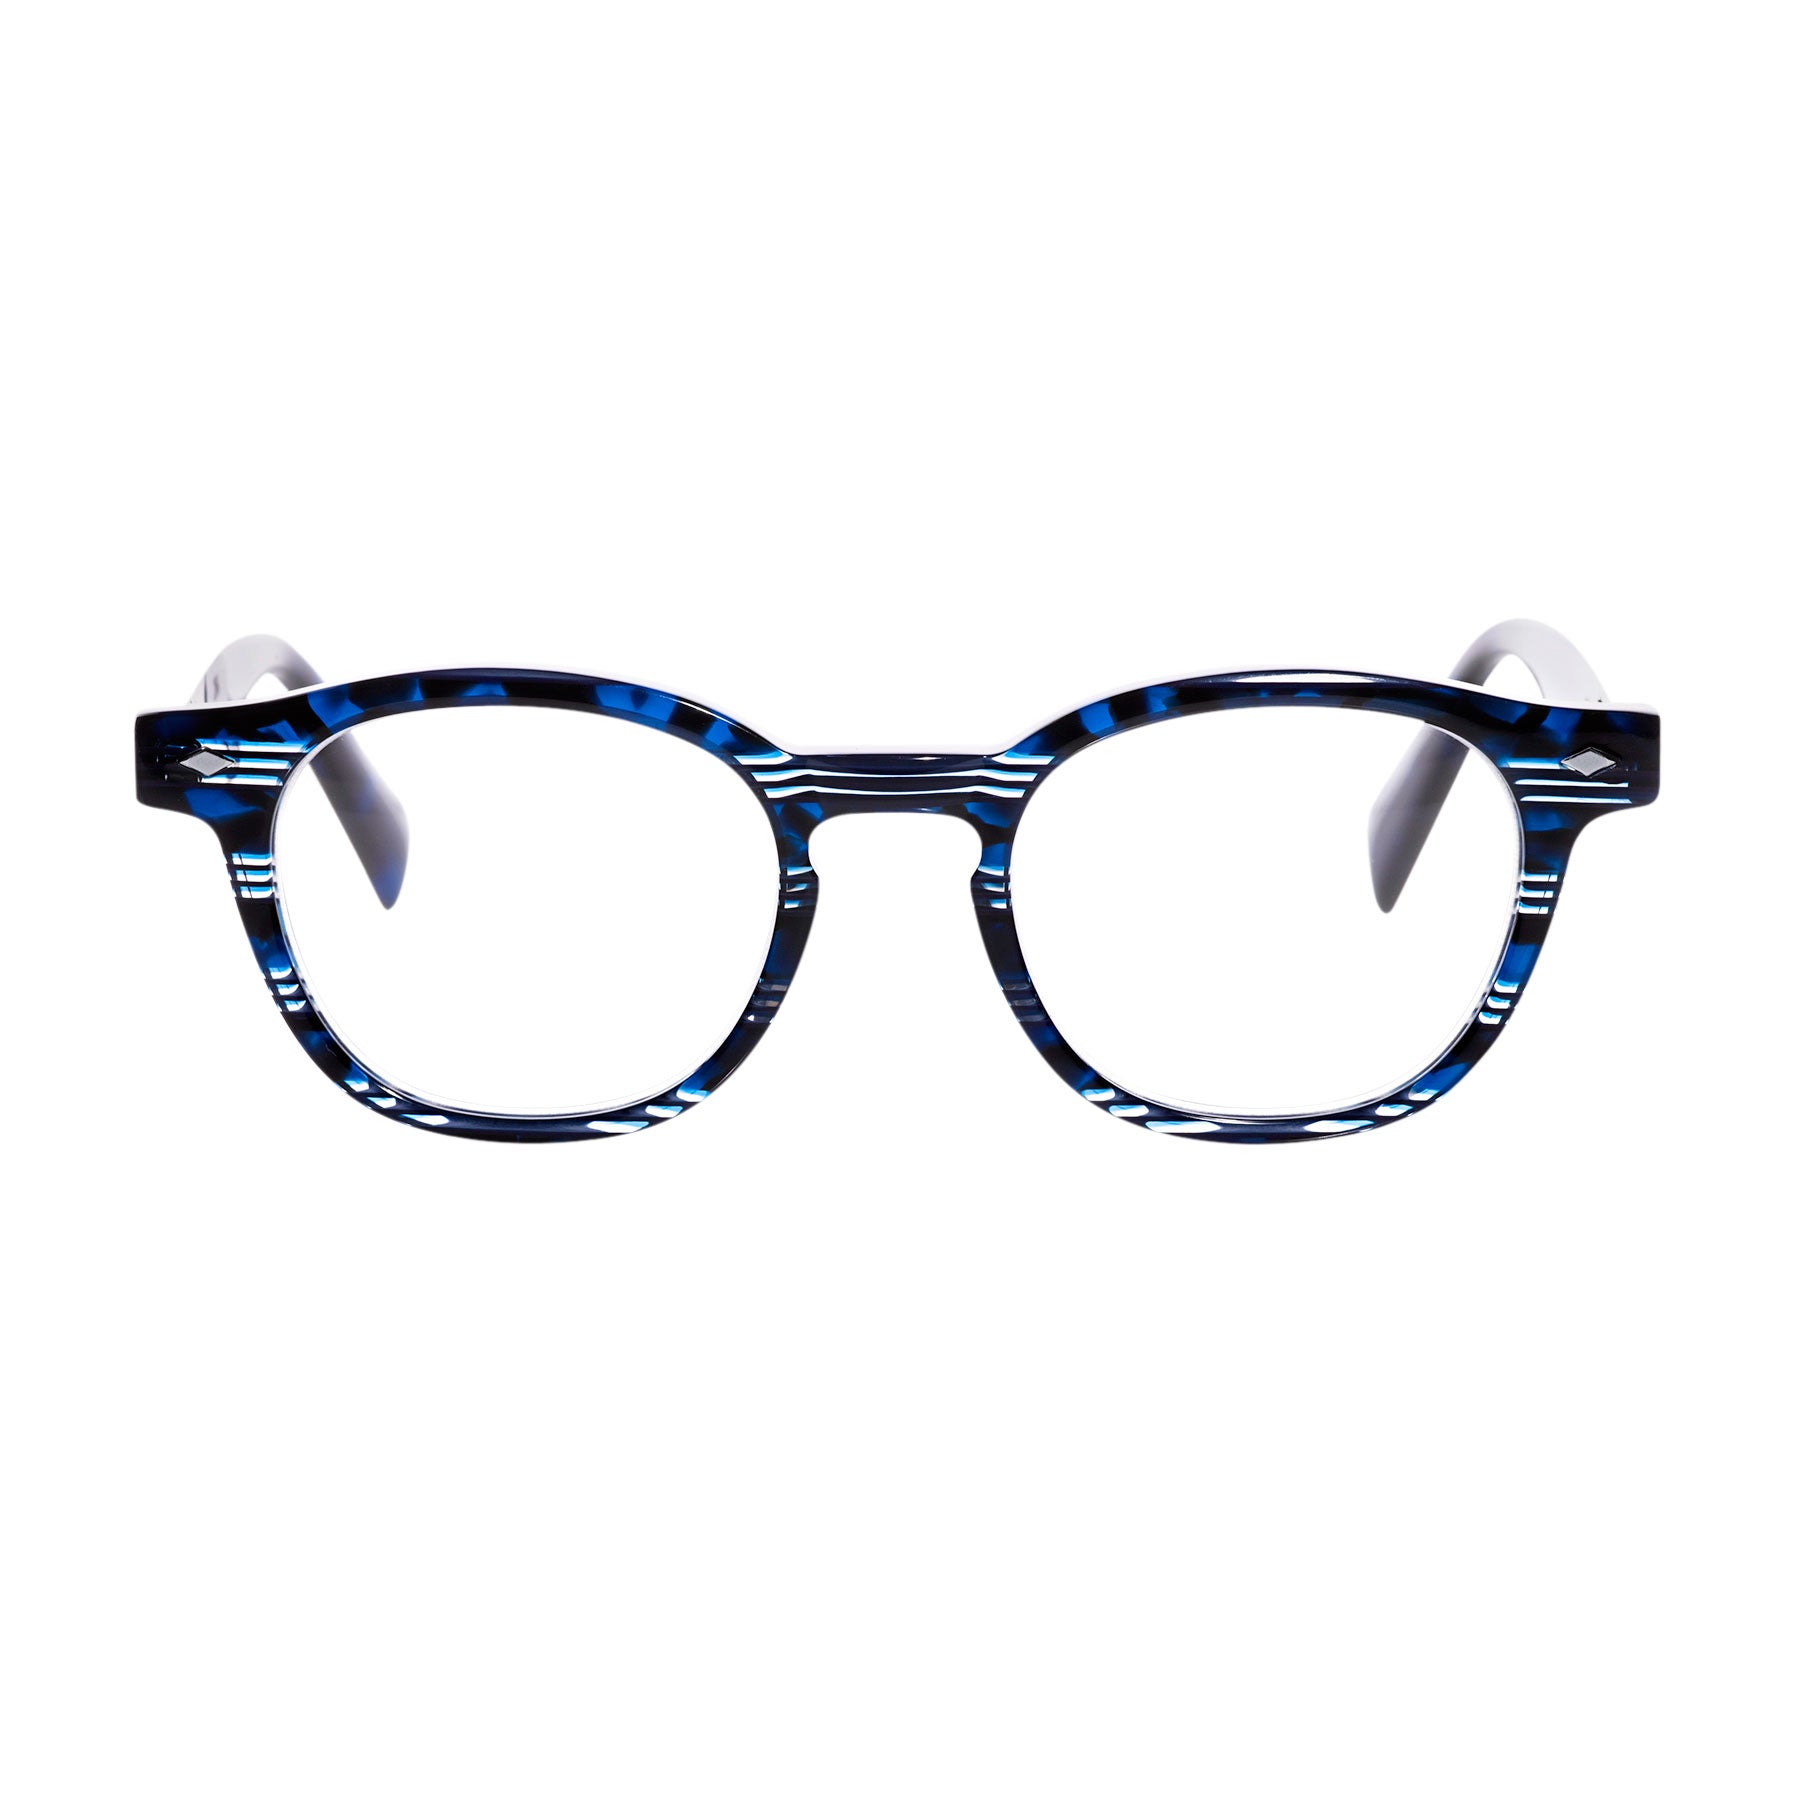 What A Spectacle: Chic Eyewear Worth Taking a Second Look At | Essence